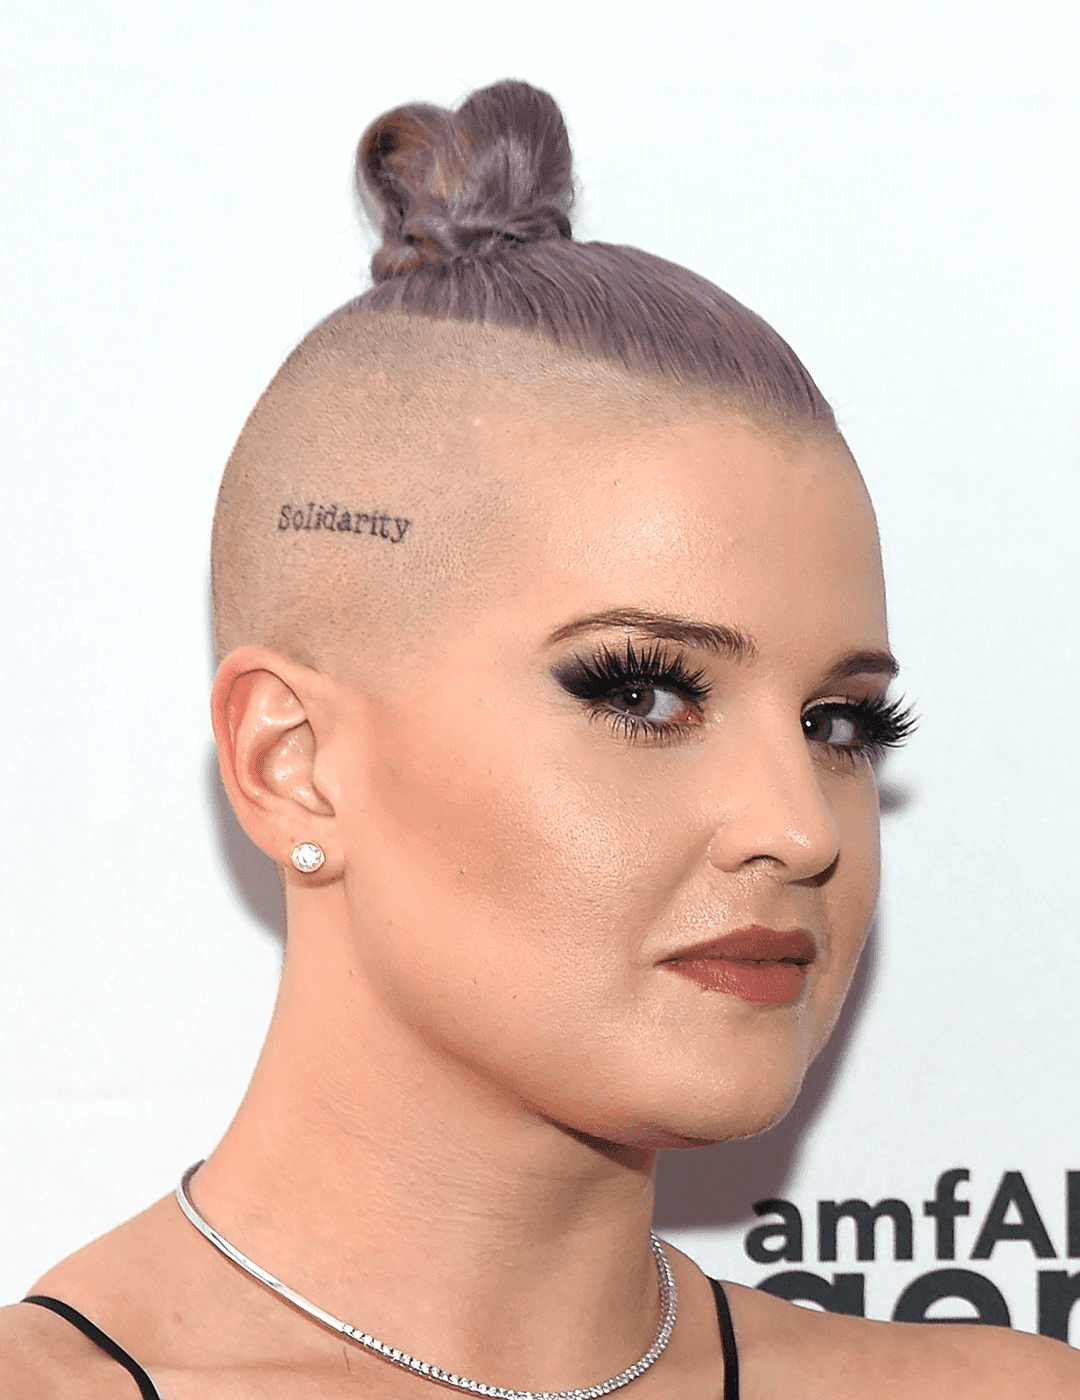 Kelly Osbourne with a lavender undercut with top knot hairstyle side-eyeing